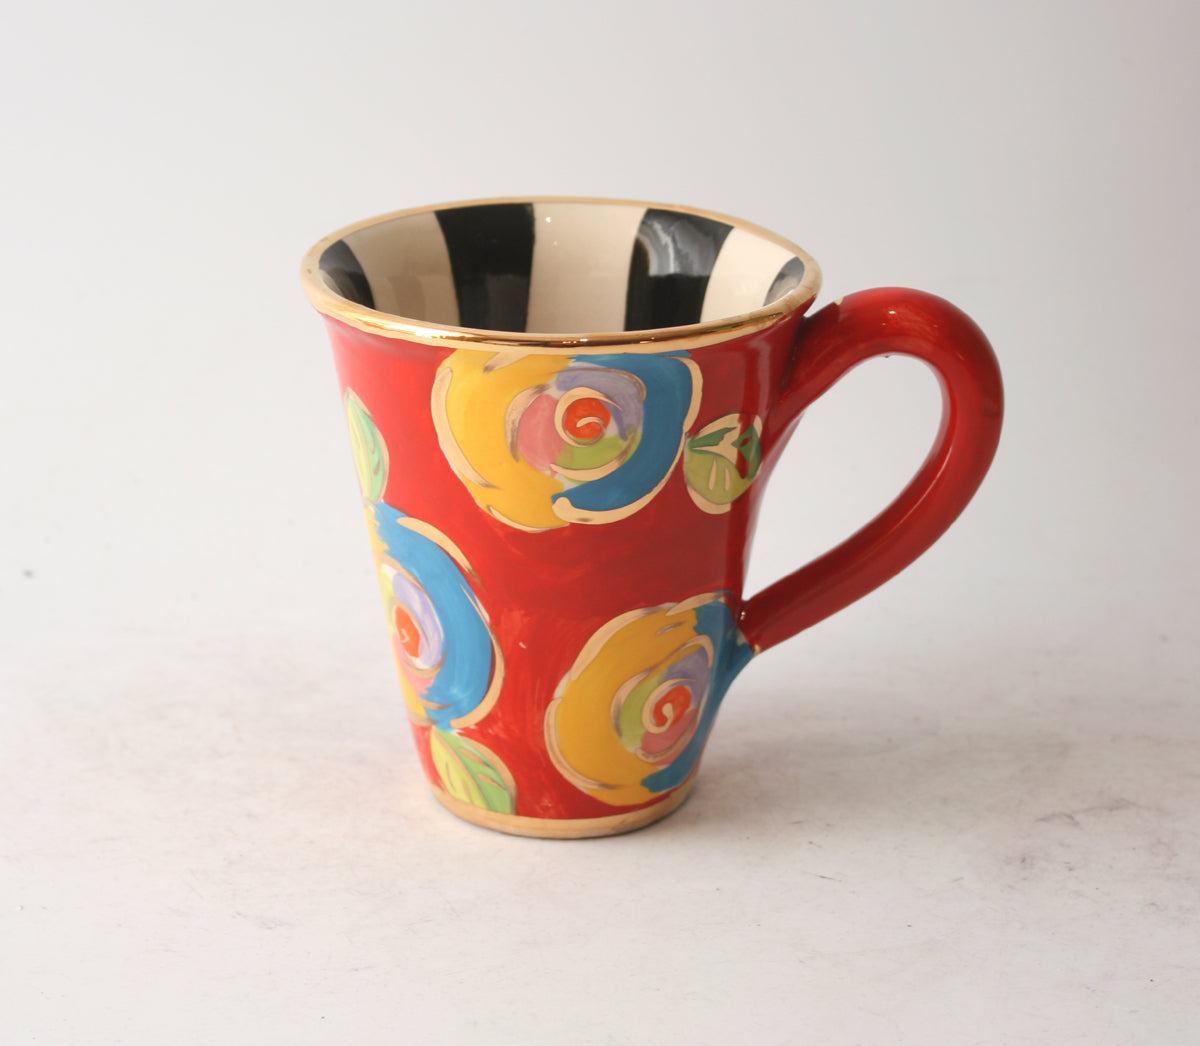 New Shape Large Mug in New Rose Red with Black and White Stripes